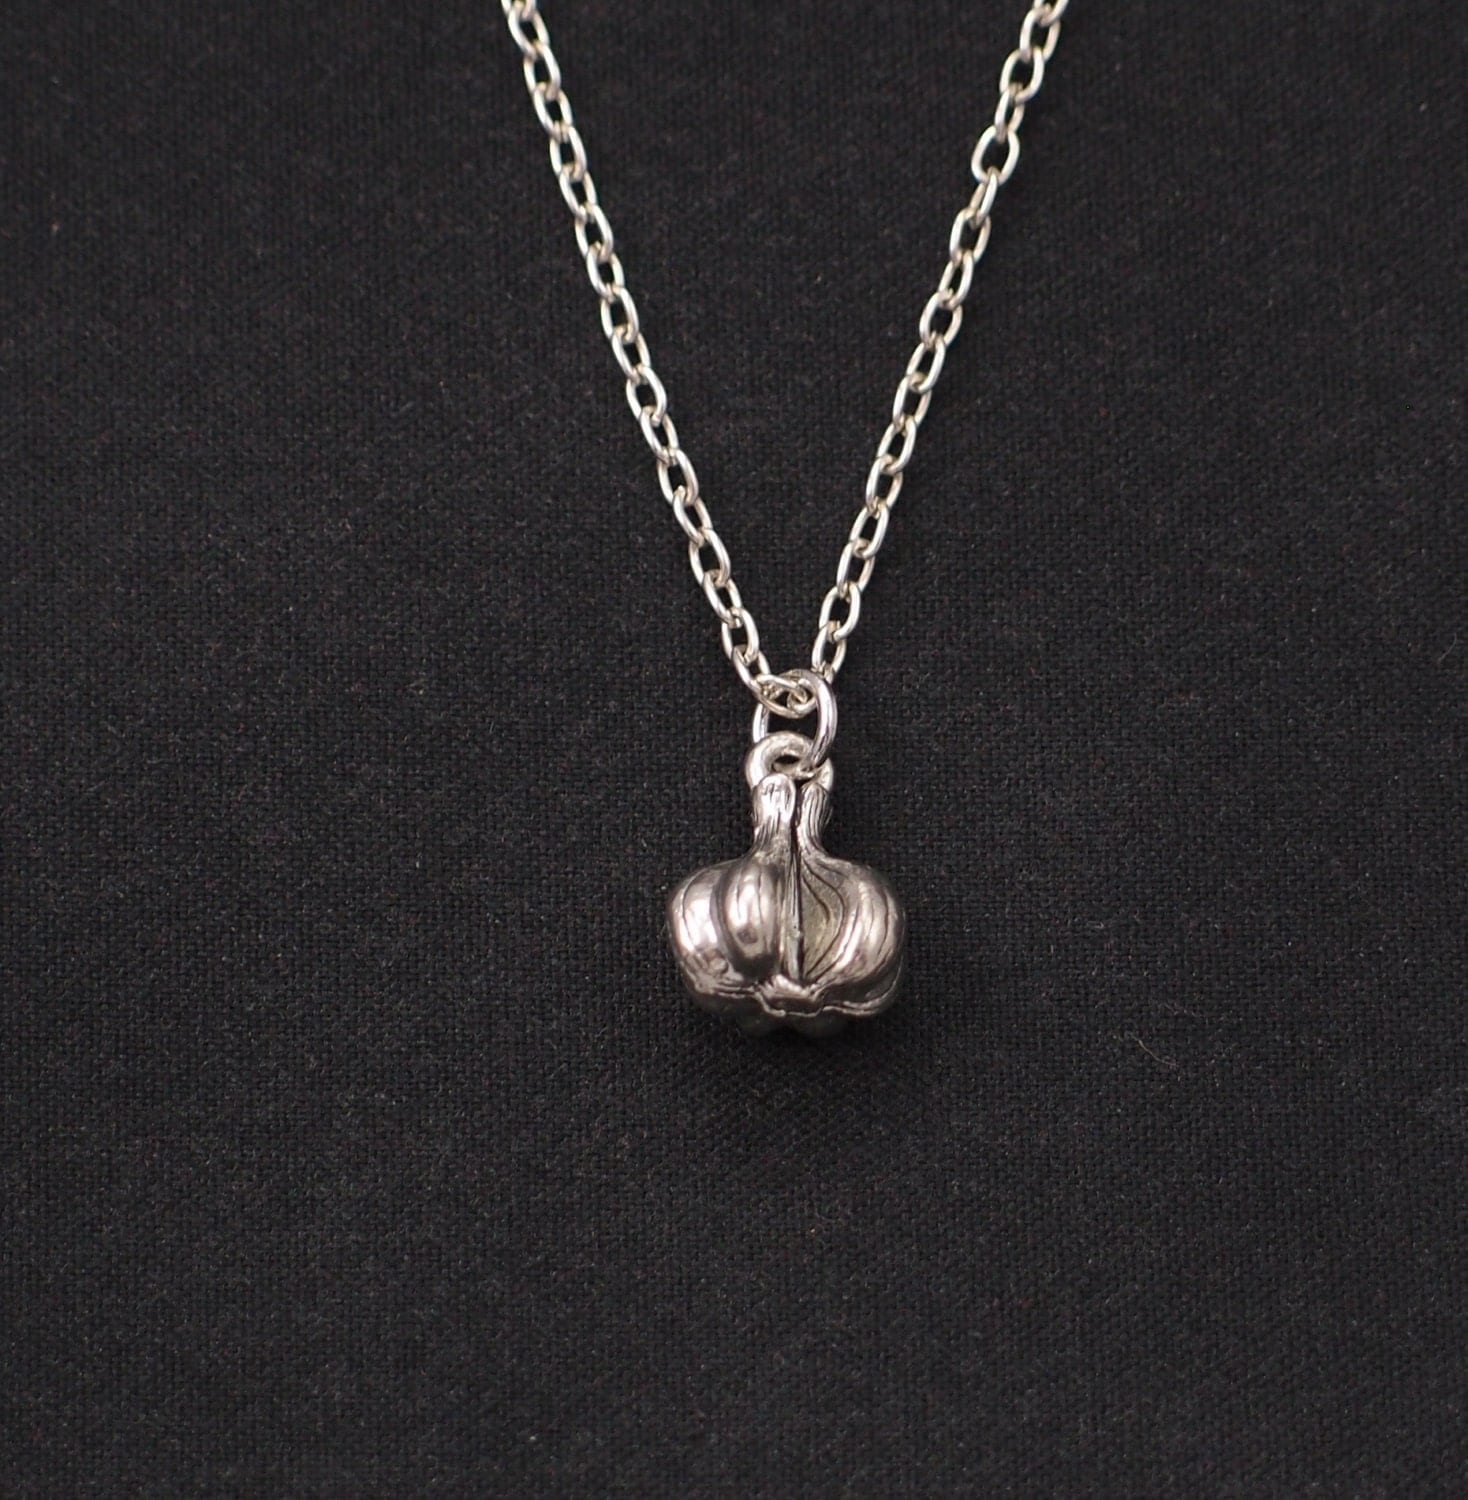 garlic necklace sterling silver filled silver tiny garlic